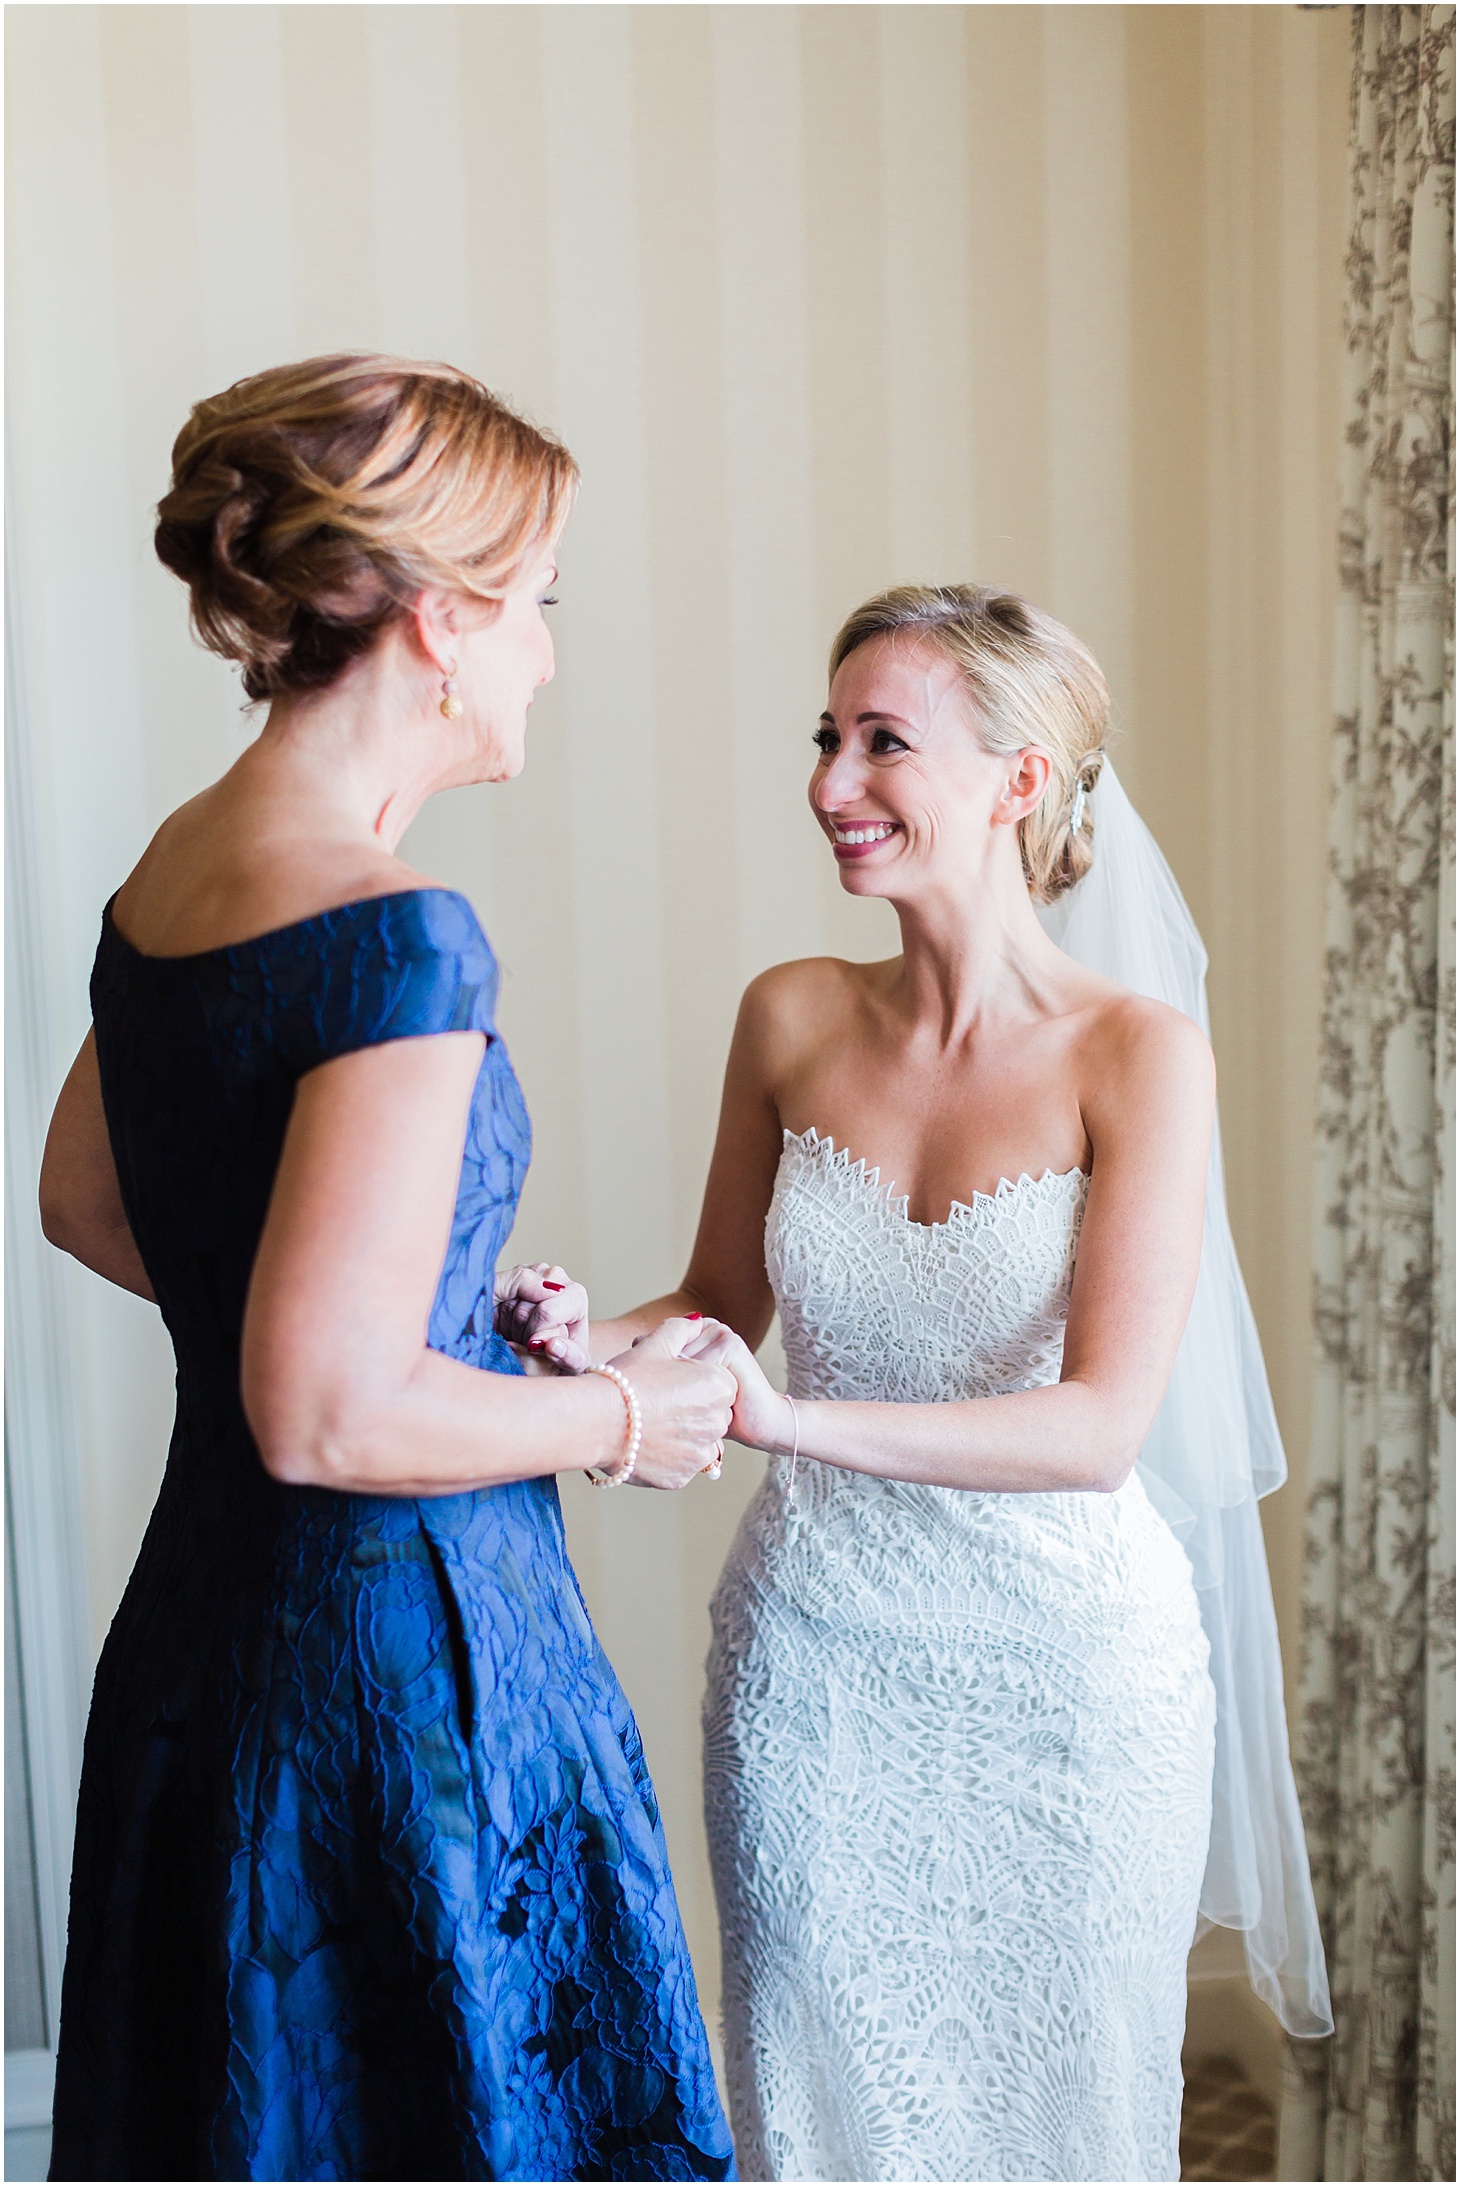 Bride Getting Ready at The Hay-Adams Hotel, Industrial-Chic Wedding at Long View Gallery in DC, Sarah Bradshaw Photography, DC Wedding Photographer